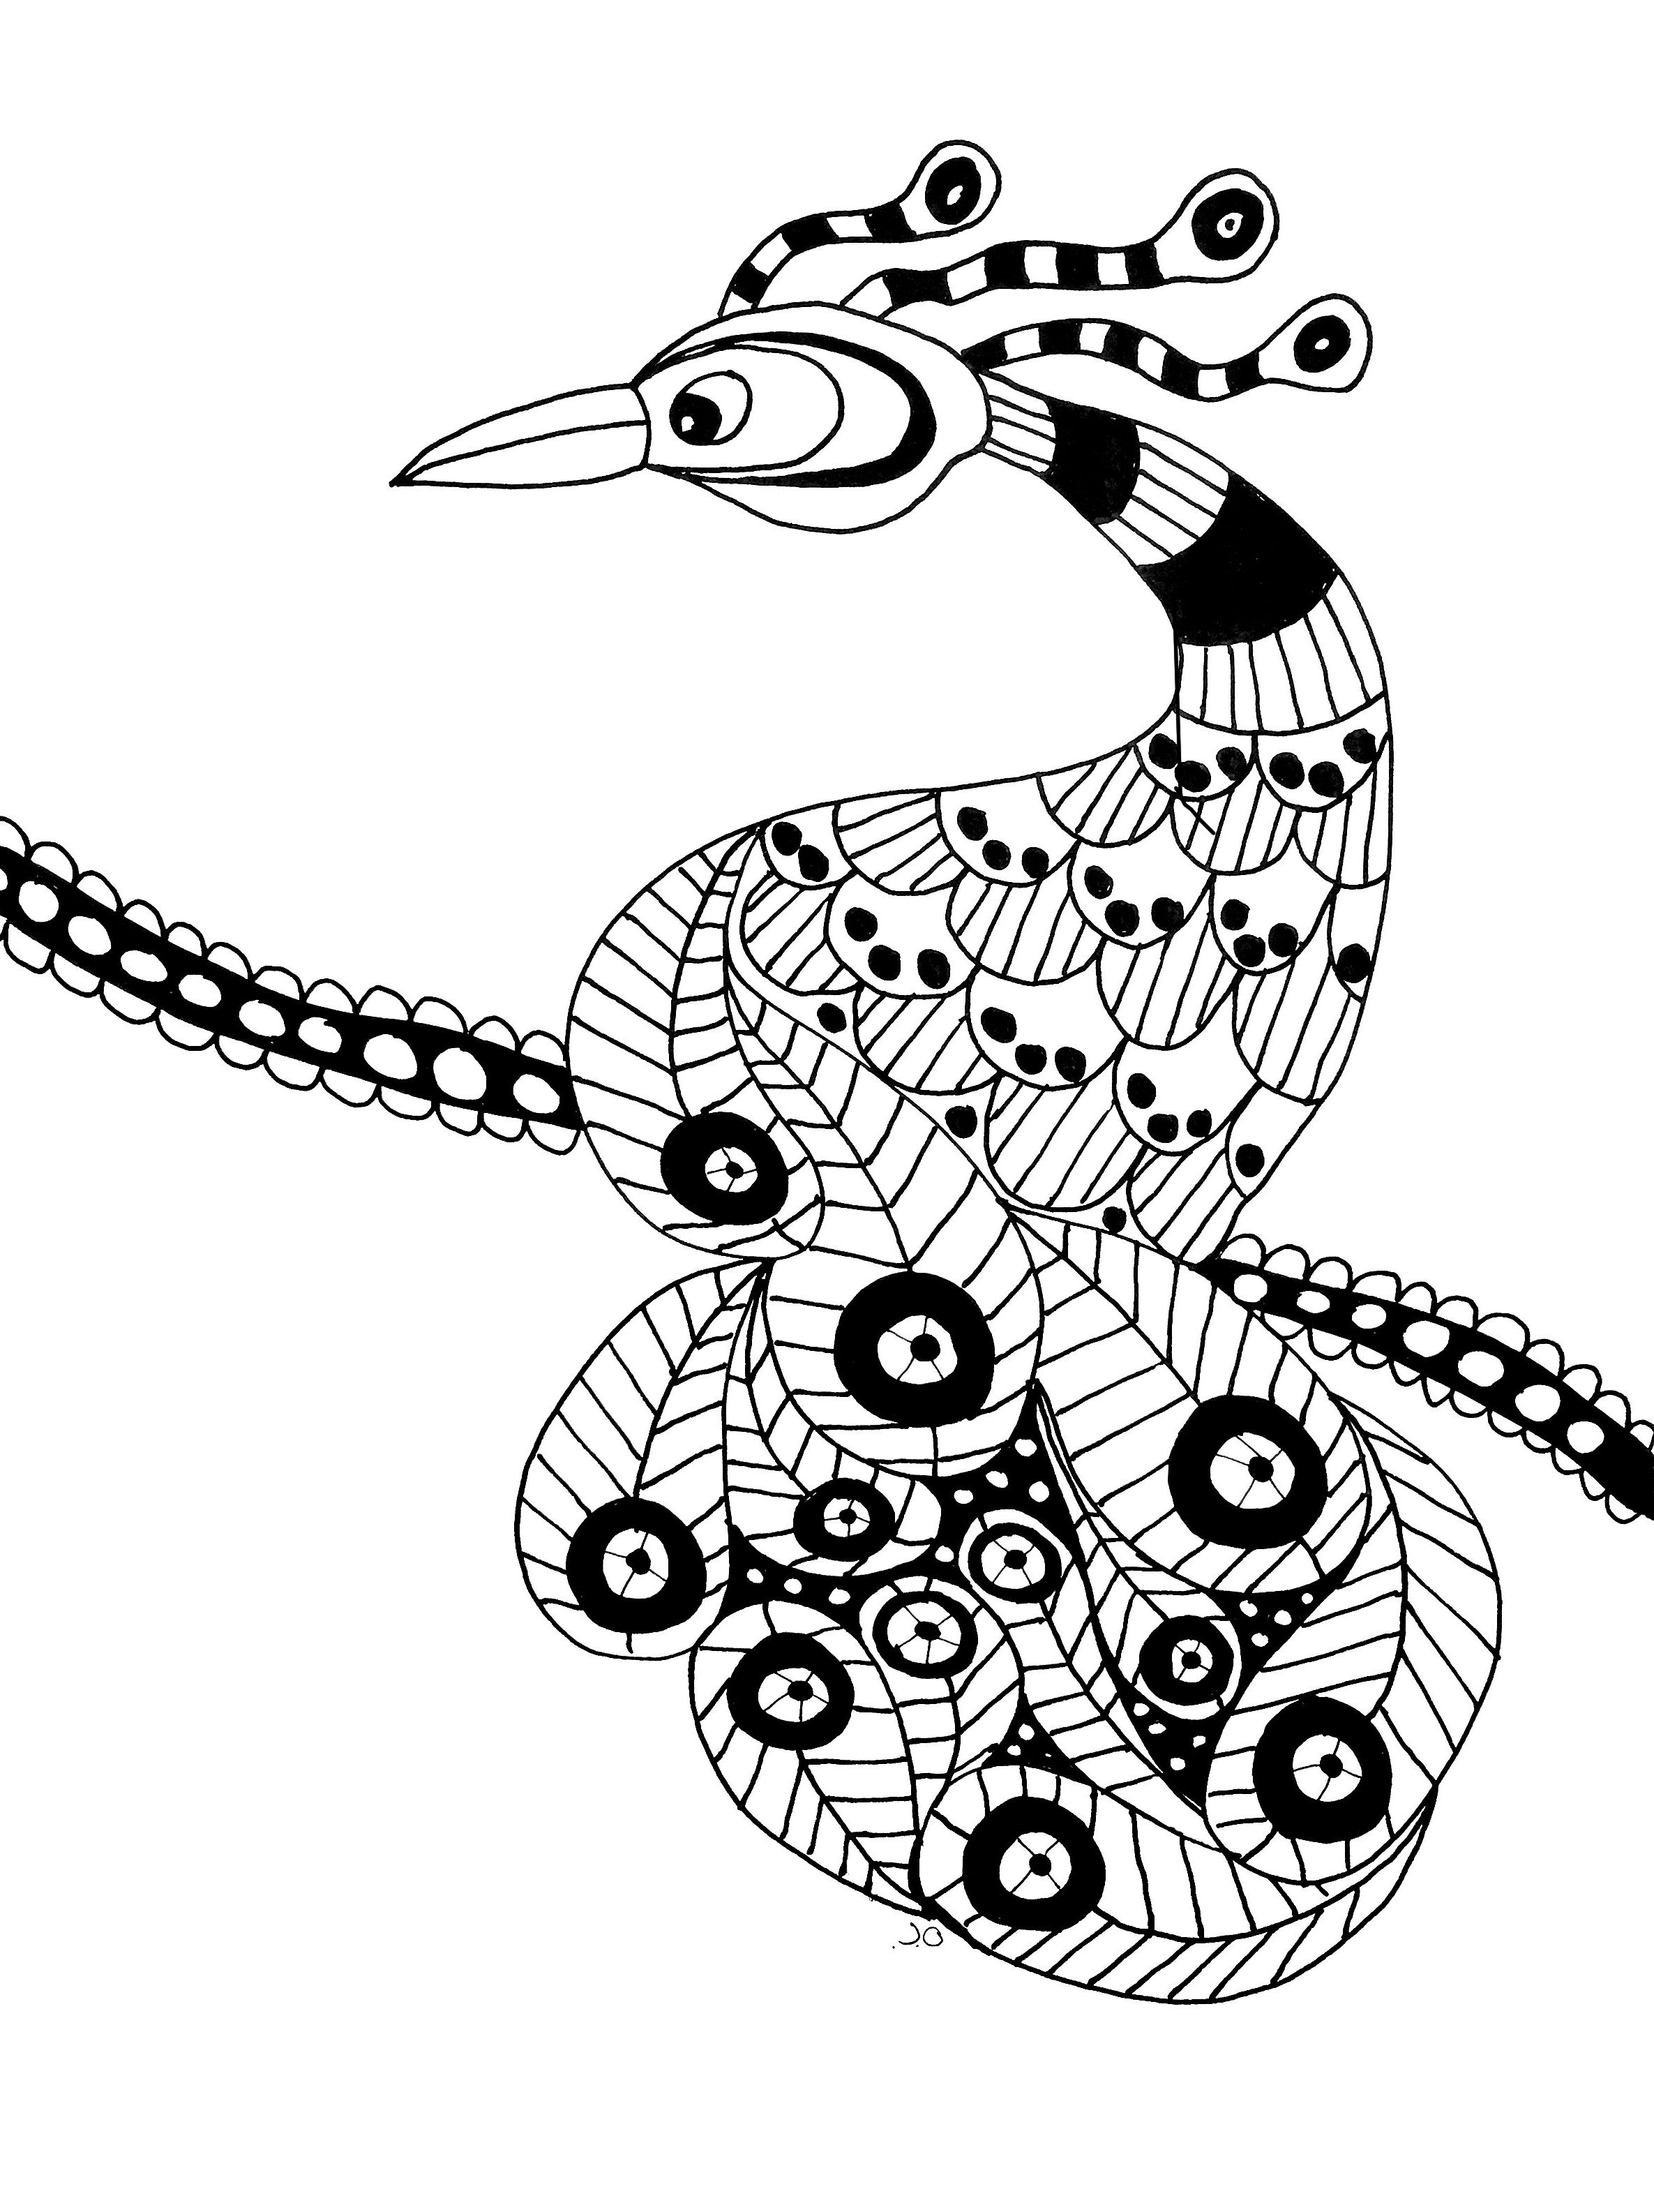 Download Extaordinary bird - Birds Adult Coloring Pages